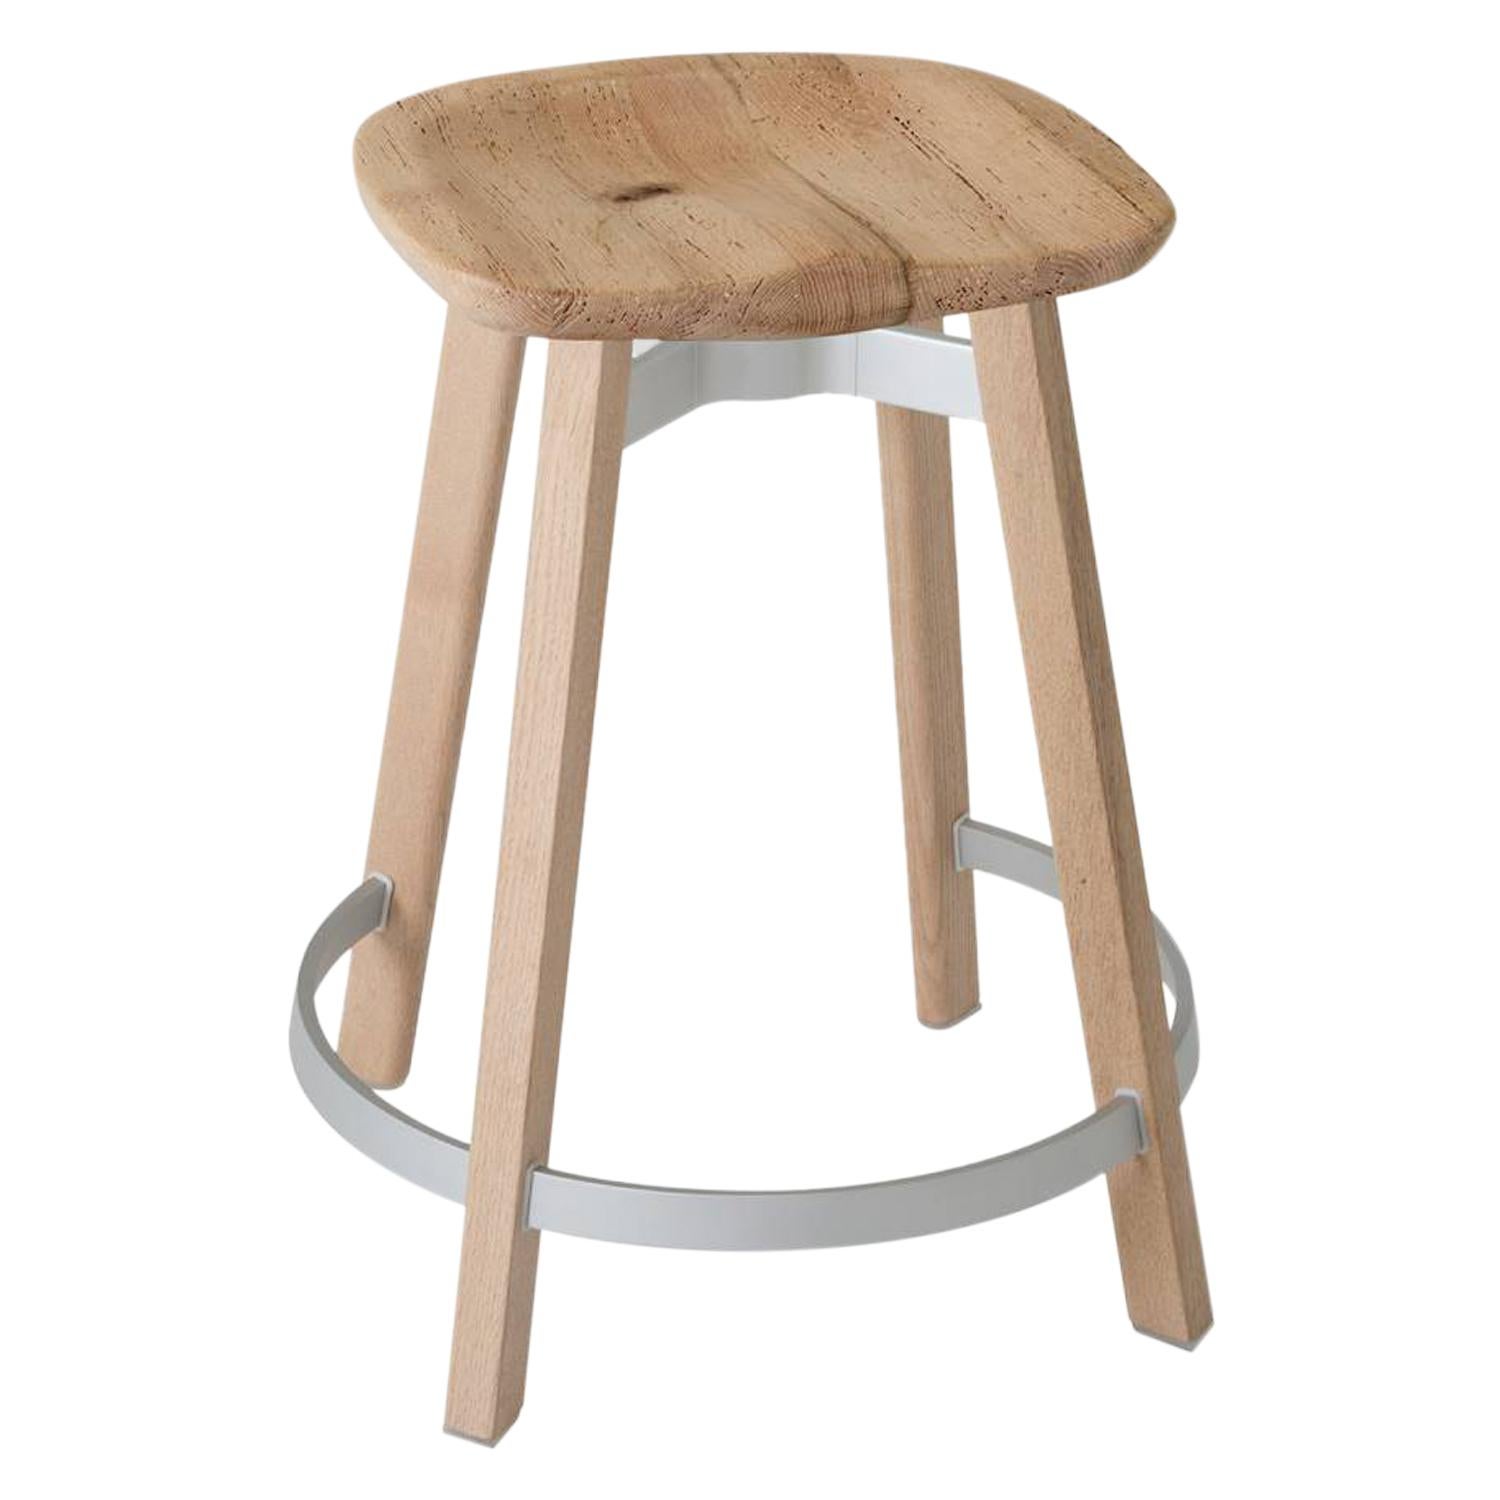 Emeco Su Counter Stool in Wood w/ Reclaimed Oak Seat by Nendo For Sale